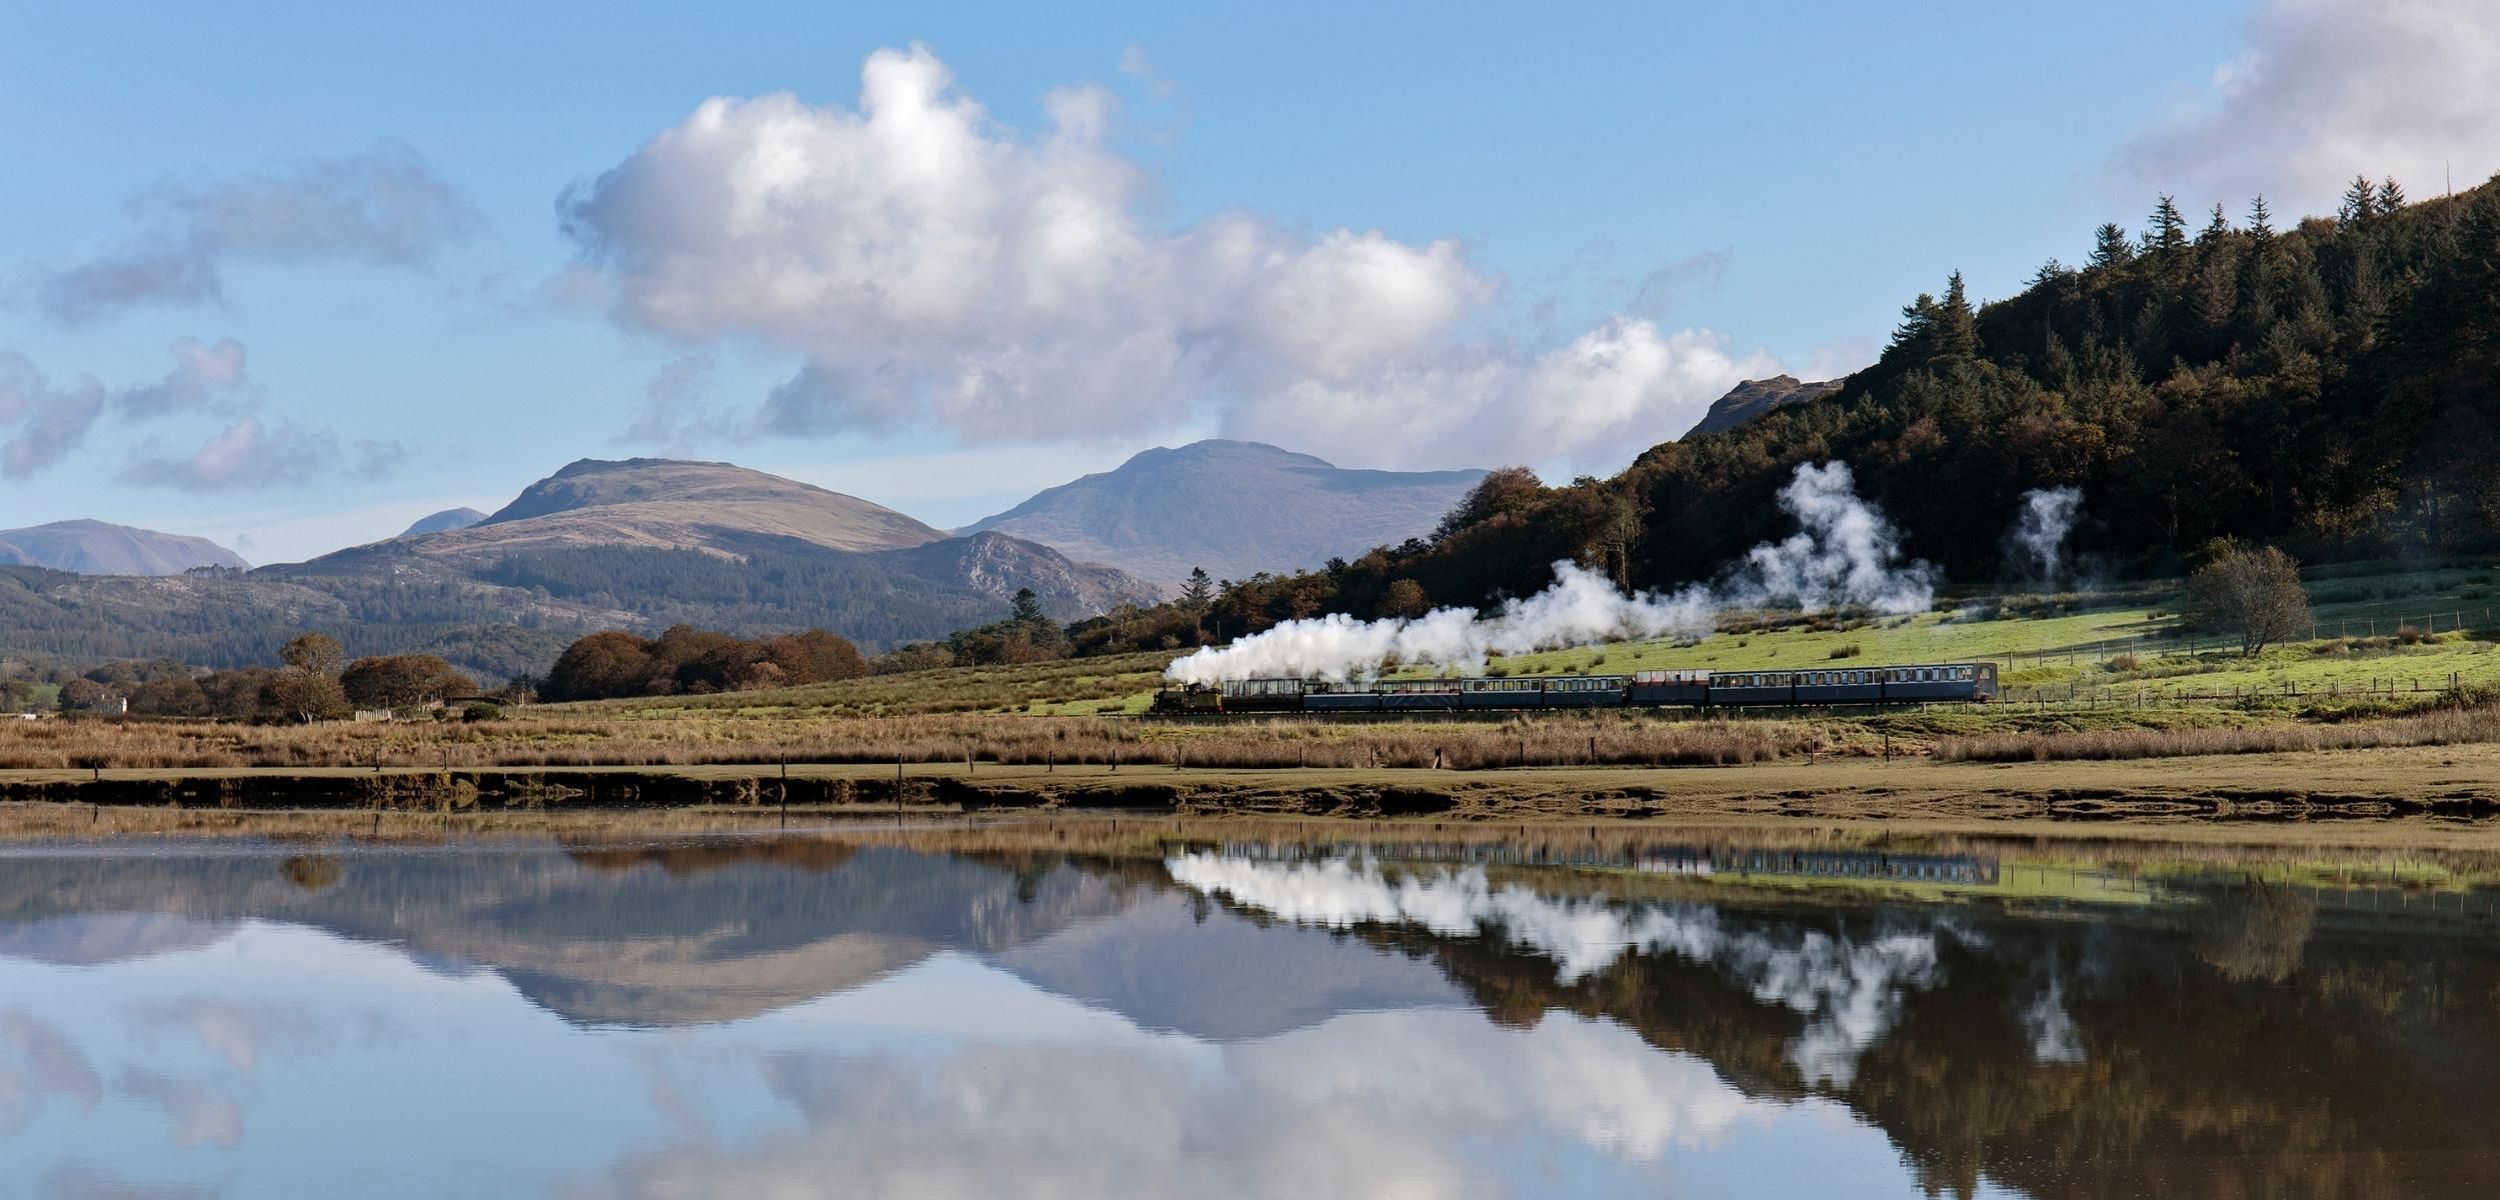 Explore the Lake District by narrow gauge railway